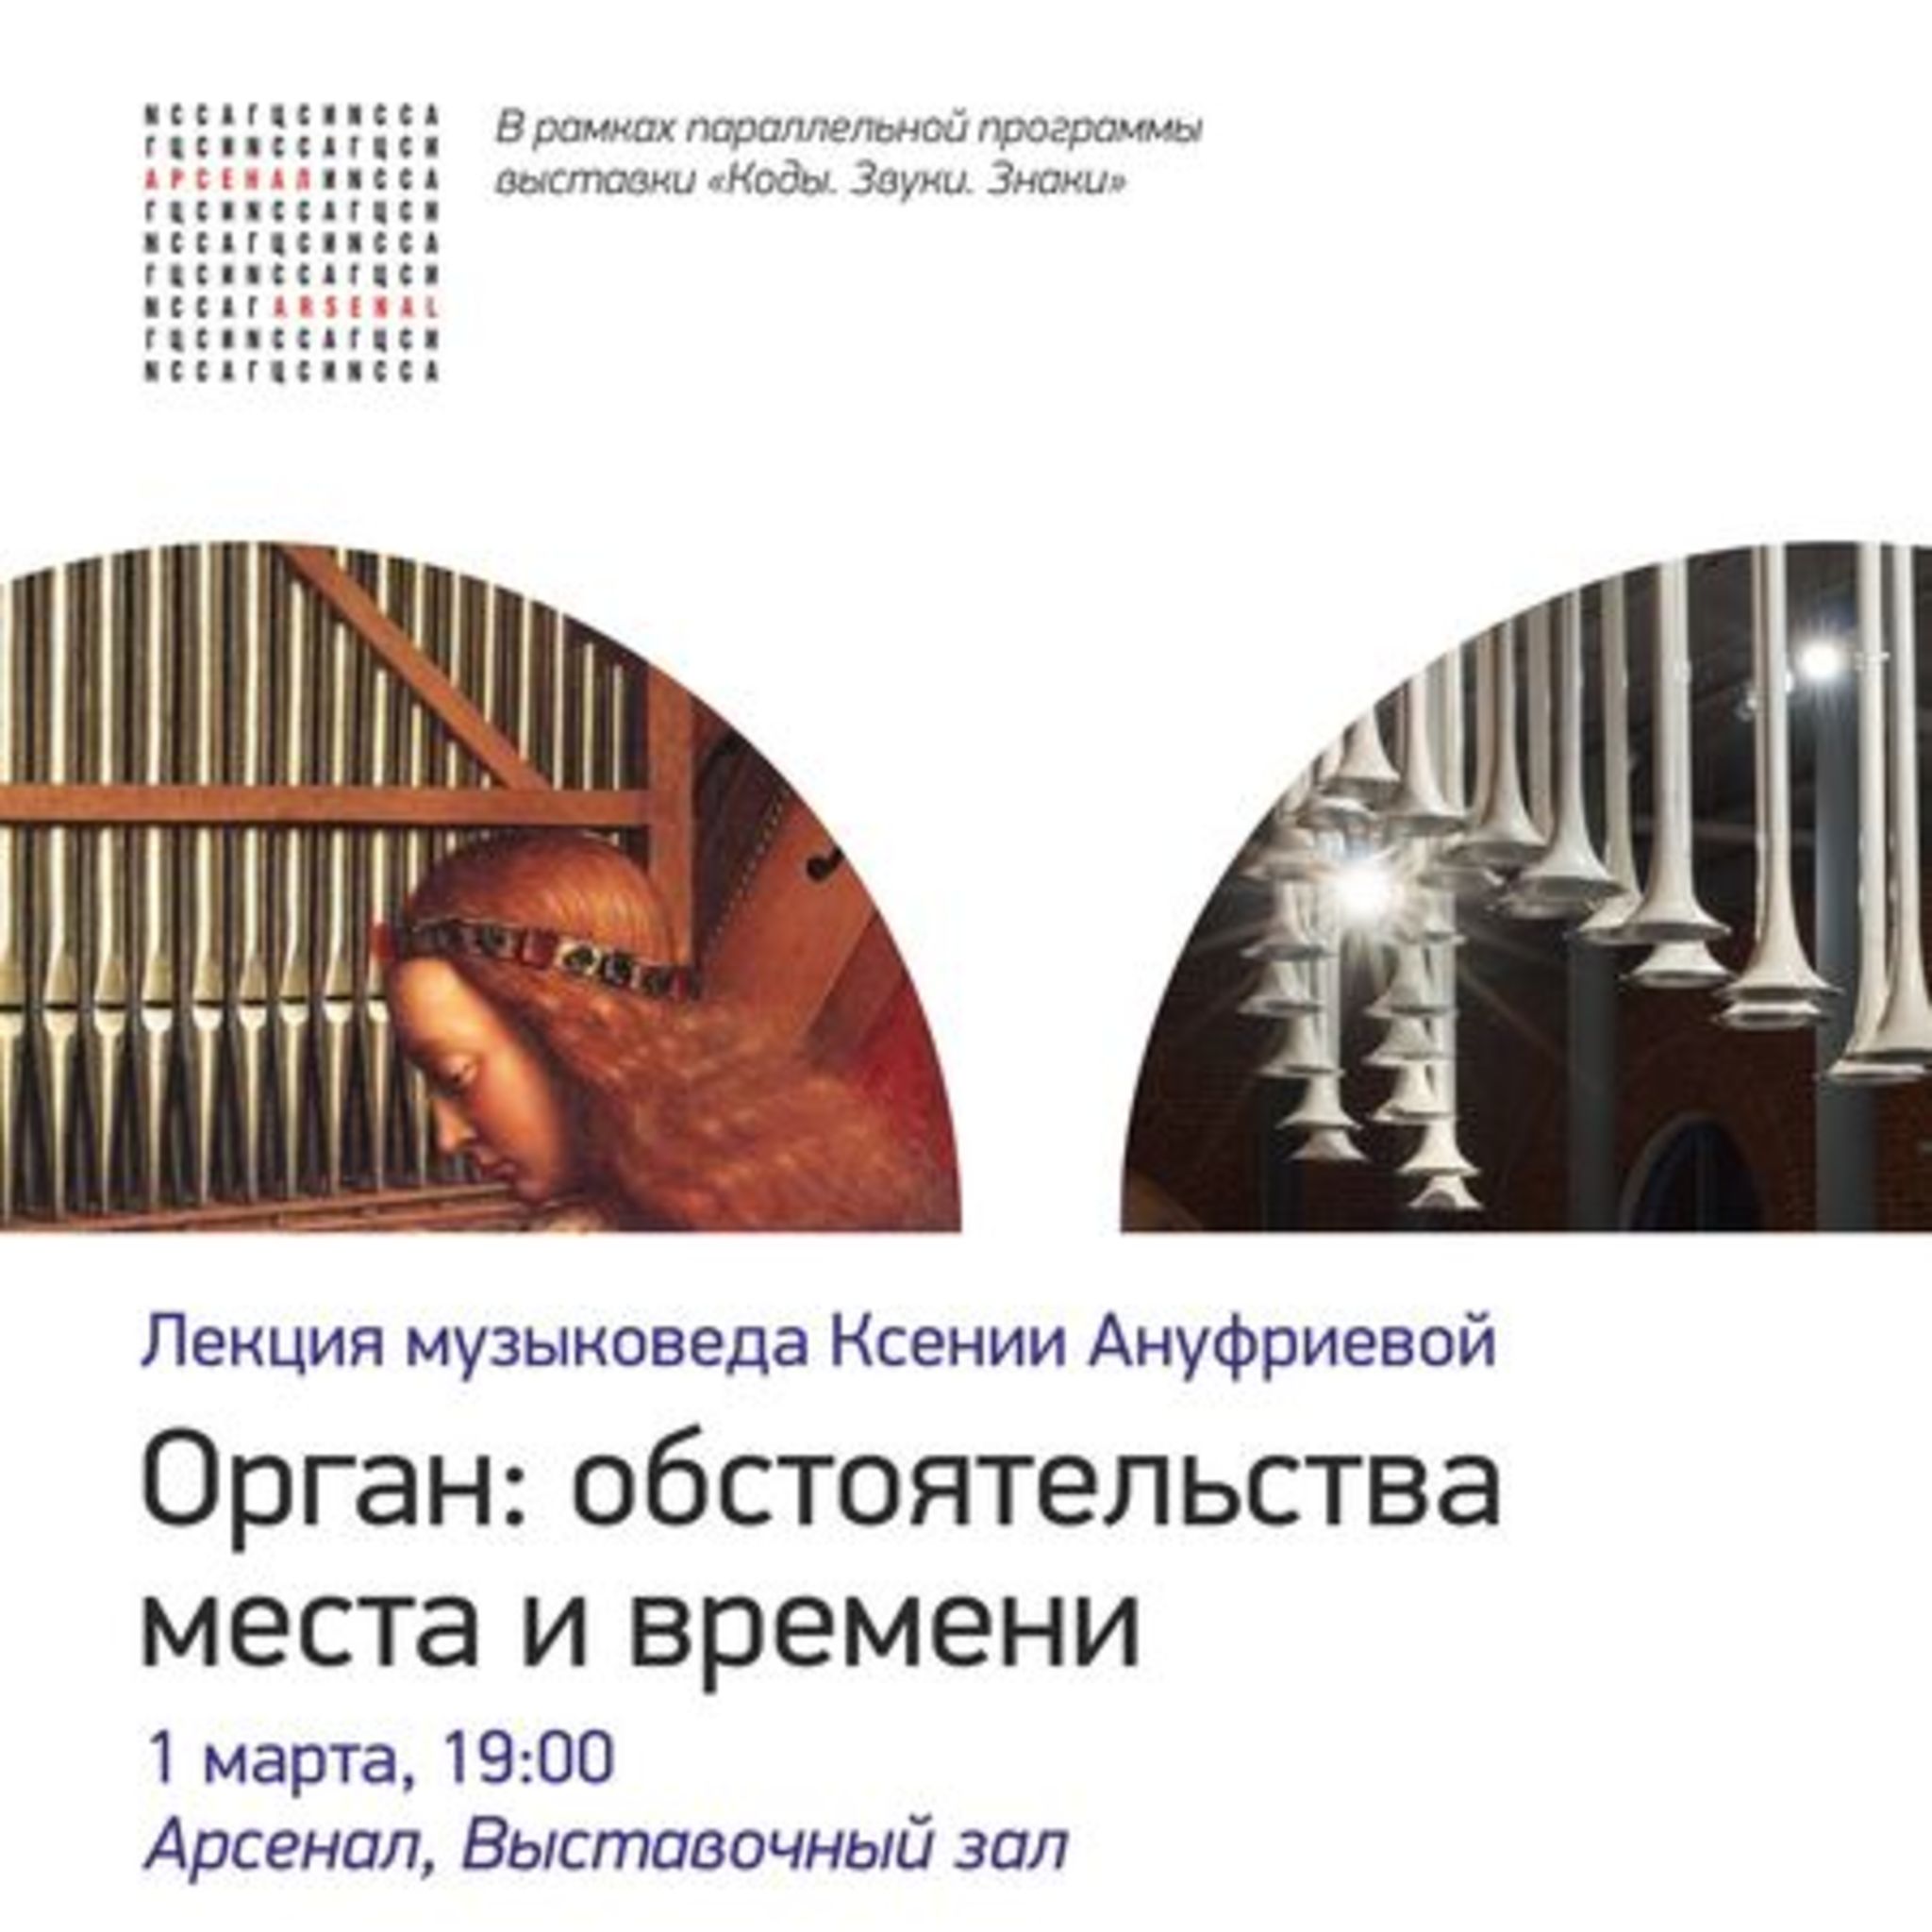 Lecture by musicologist Xenia Anufrieva Authority: the circumstances of time and place